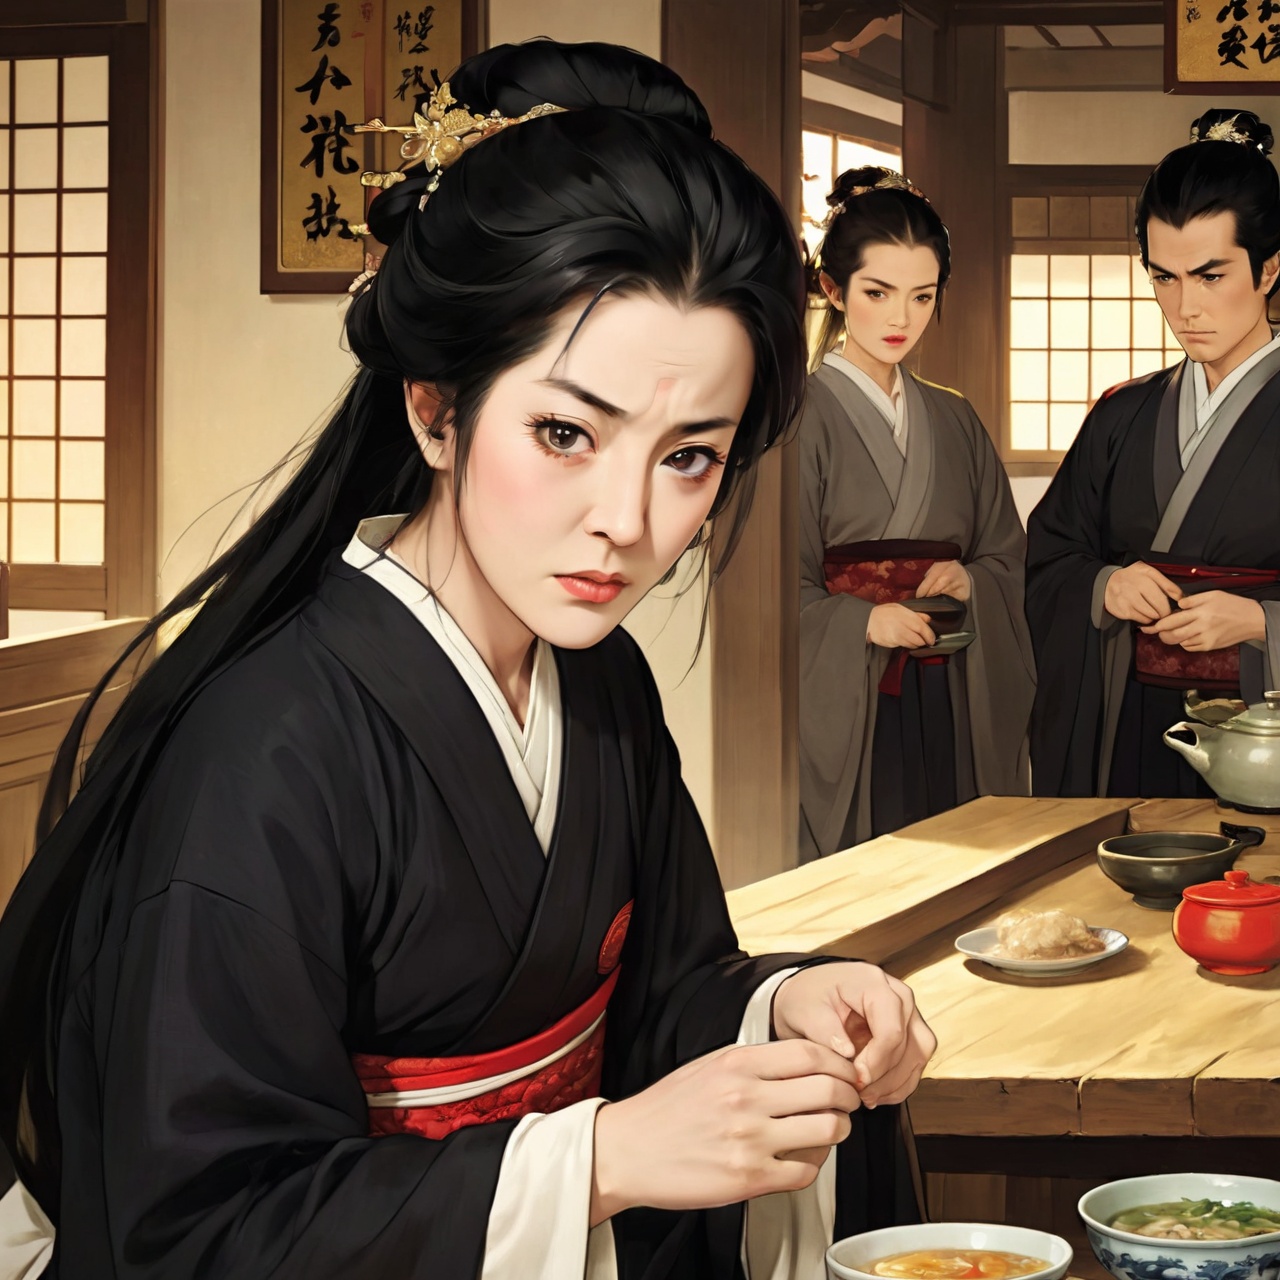  (Masterpiece, superb, quality, delicate facial features), a 50-year-old middle-aged woman with loose black hair, a wrinkled face, wearing a black wide hanfu and squinting eyes
Total 10,
((frowning, angry, opening mouth: 1.2)), (following a group of people), standing, in the kitchen, antique,